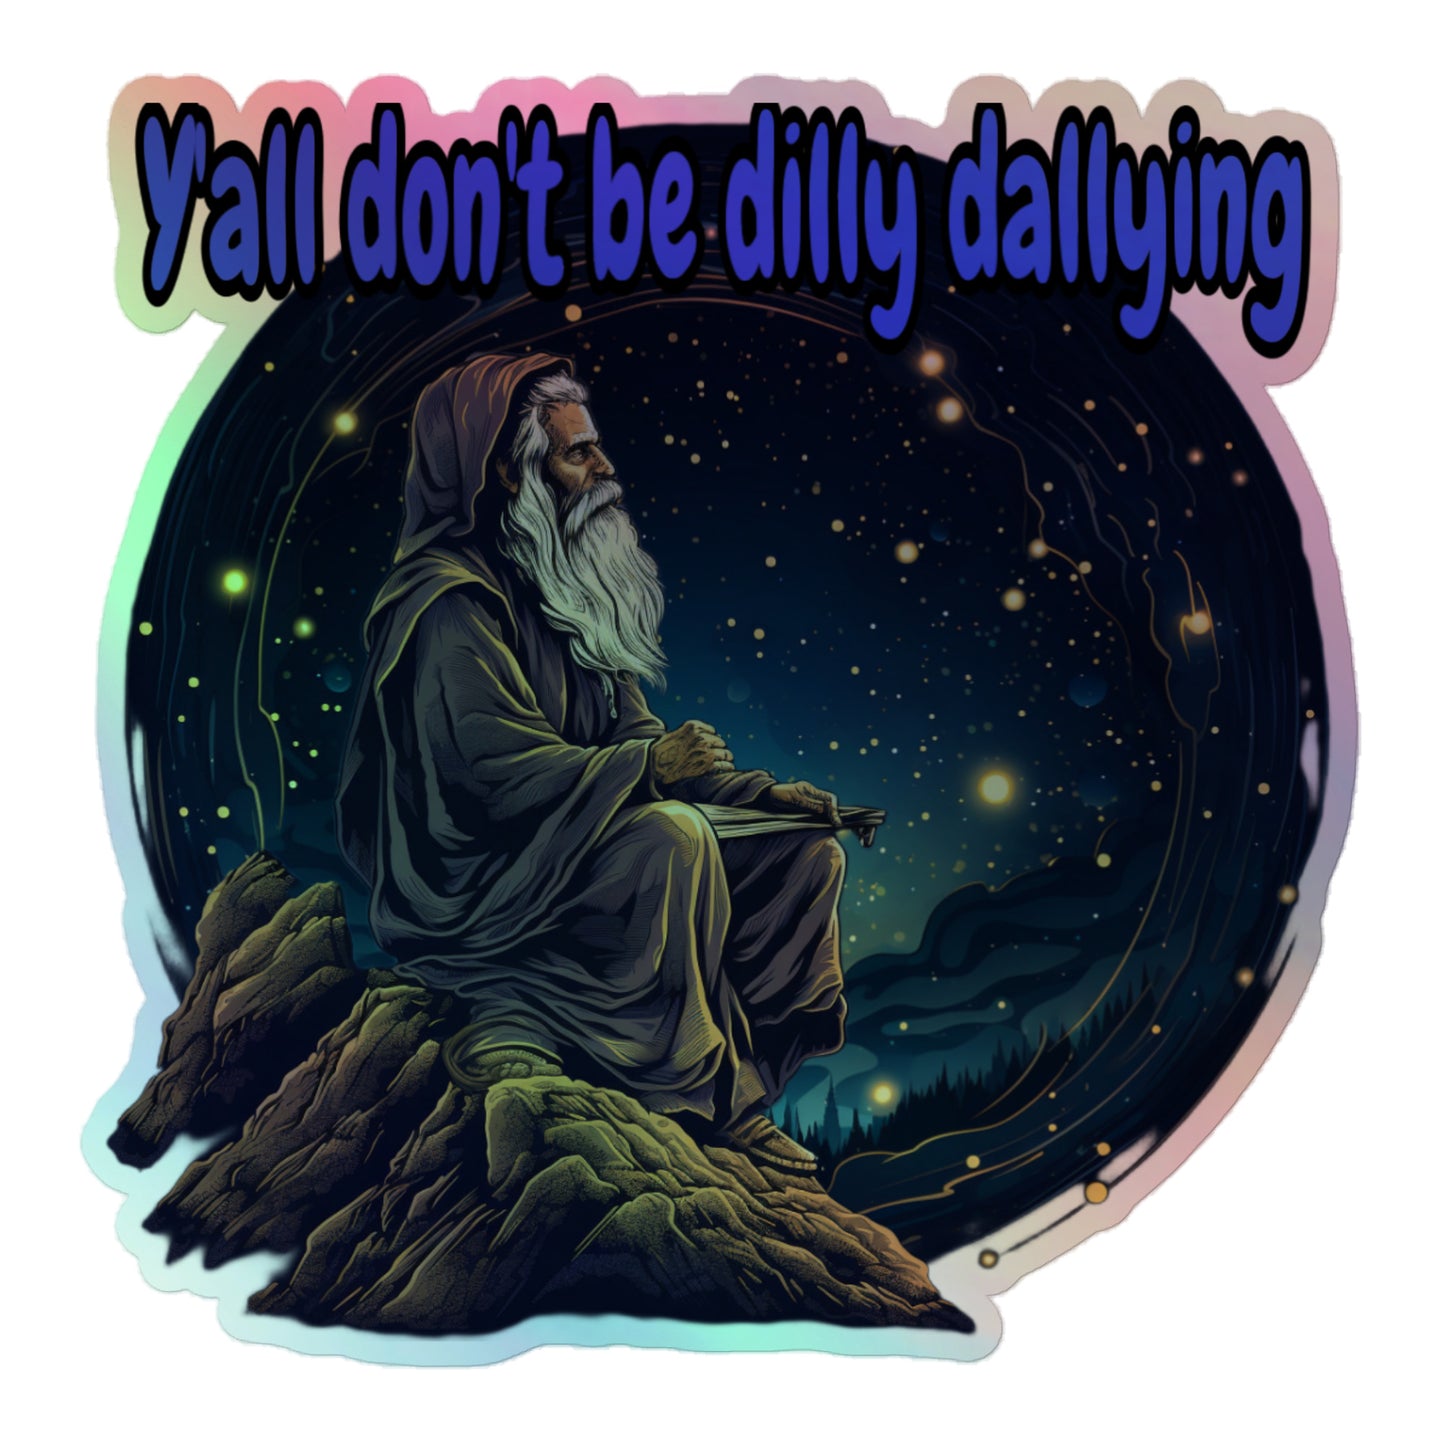 Y’all don’t be dilly dallying Holographic stickers